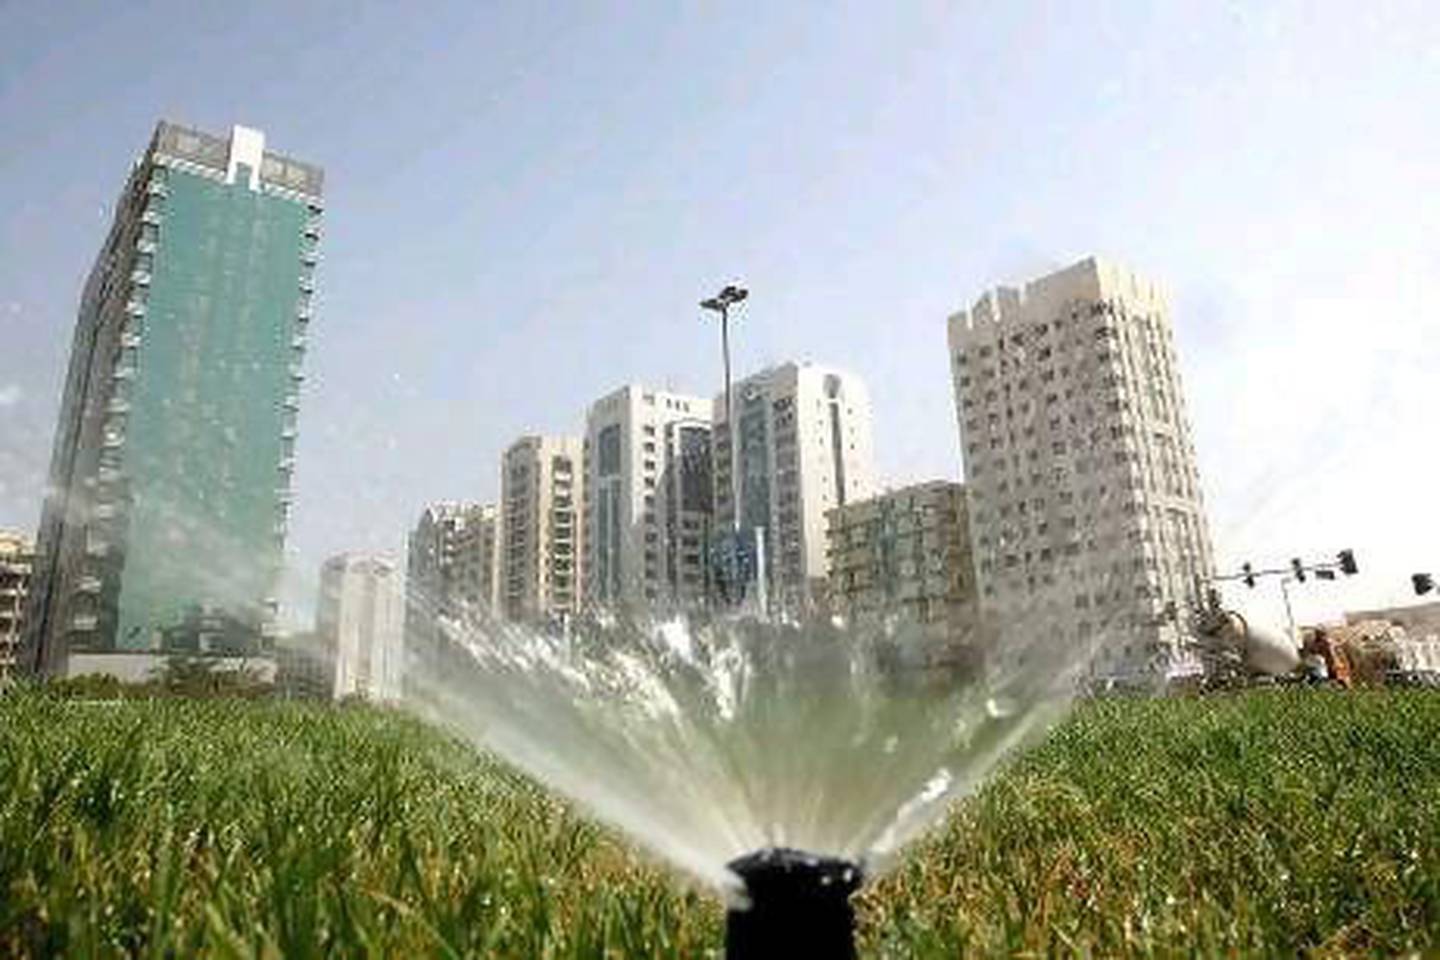 The UAE's water consumption is among the highest in the world – approximately 500 litres per day, which is 50 per cent above the global average.